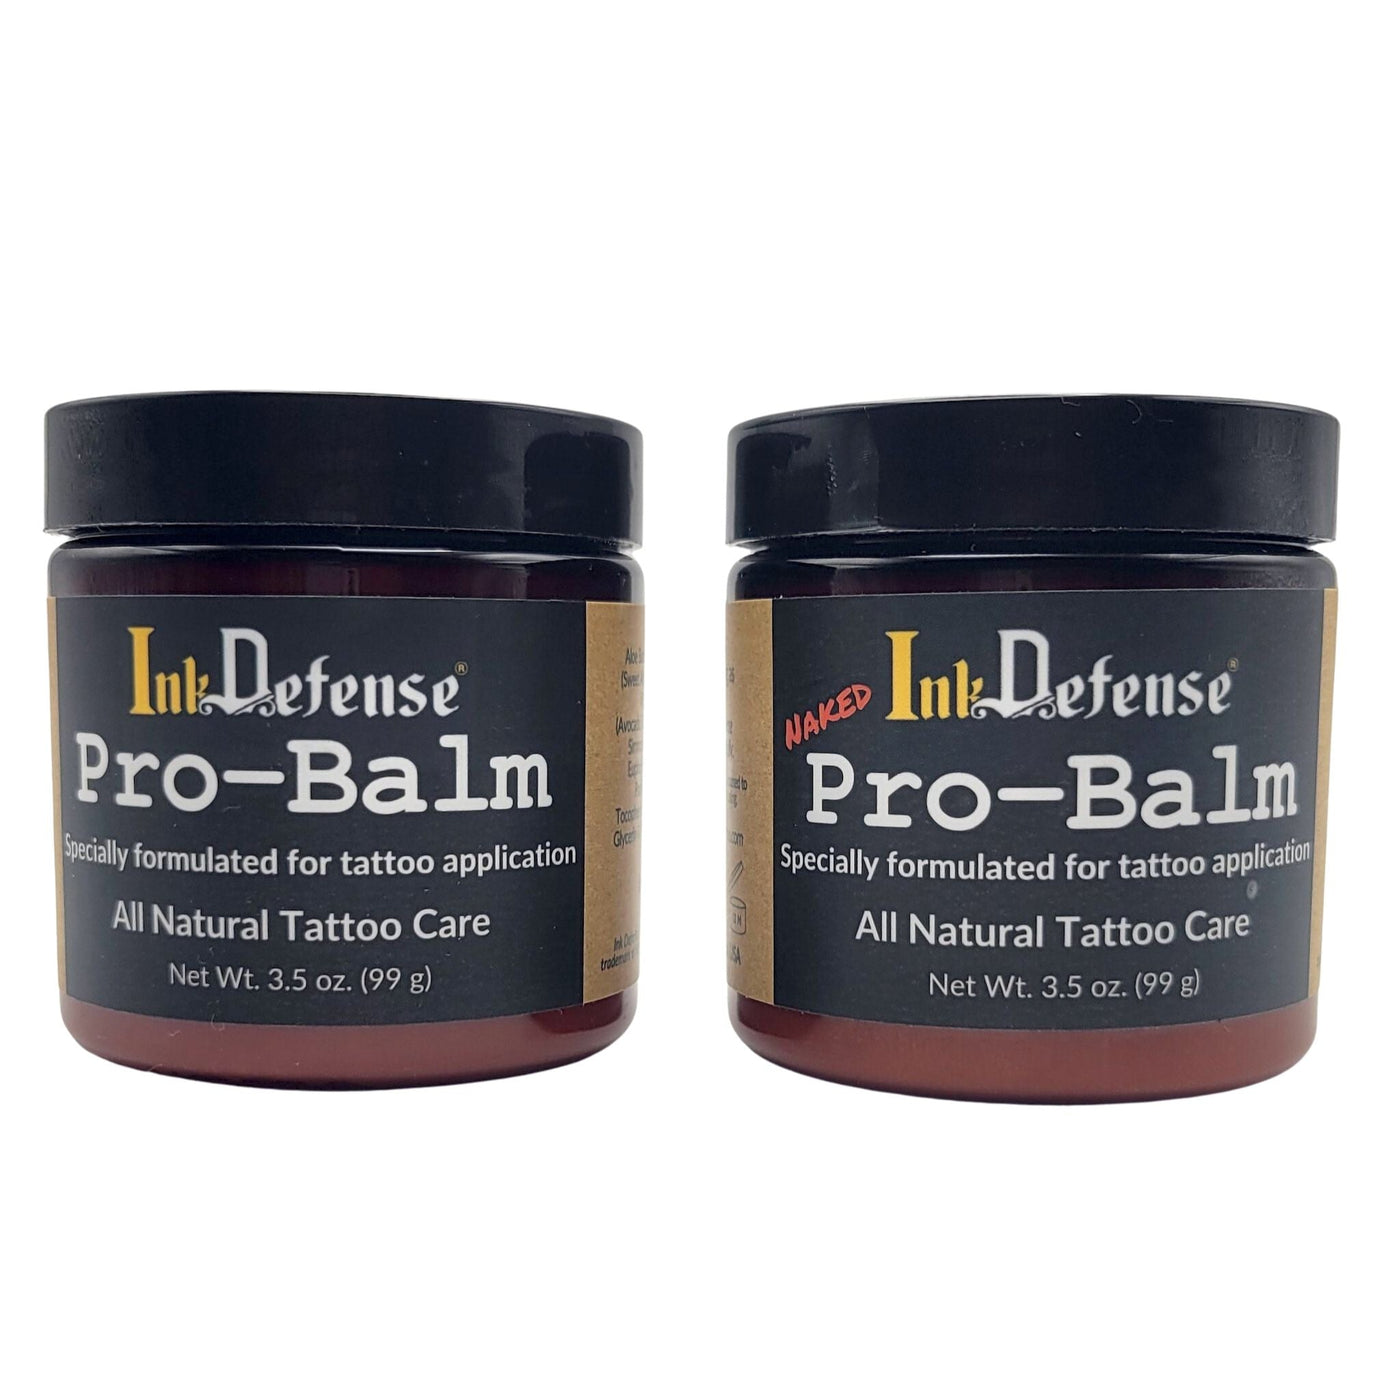 Pro-Balm for Tattoo Artists both versions - Ink Defense